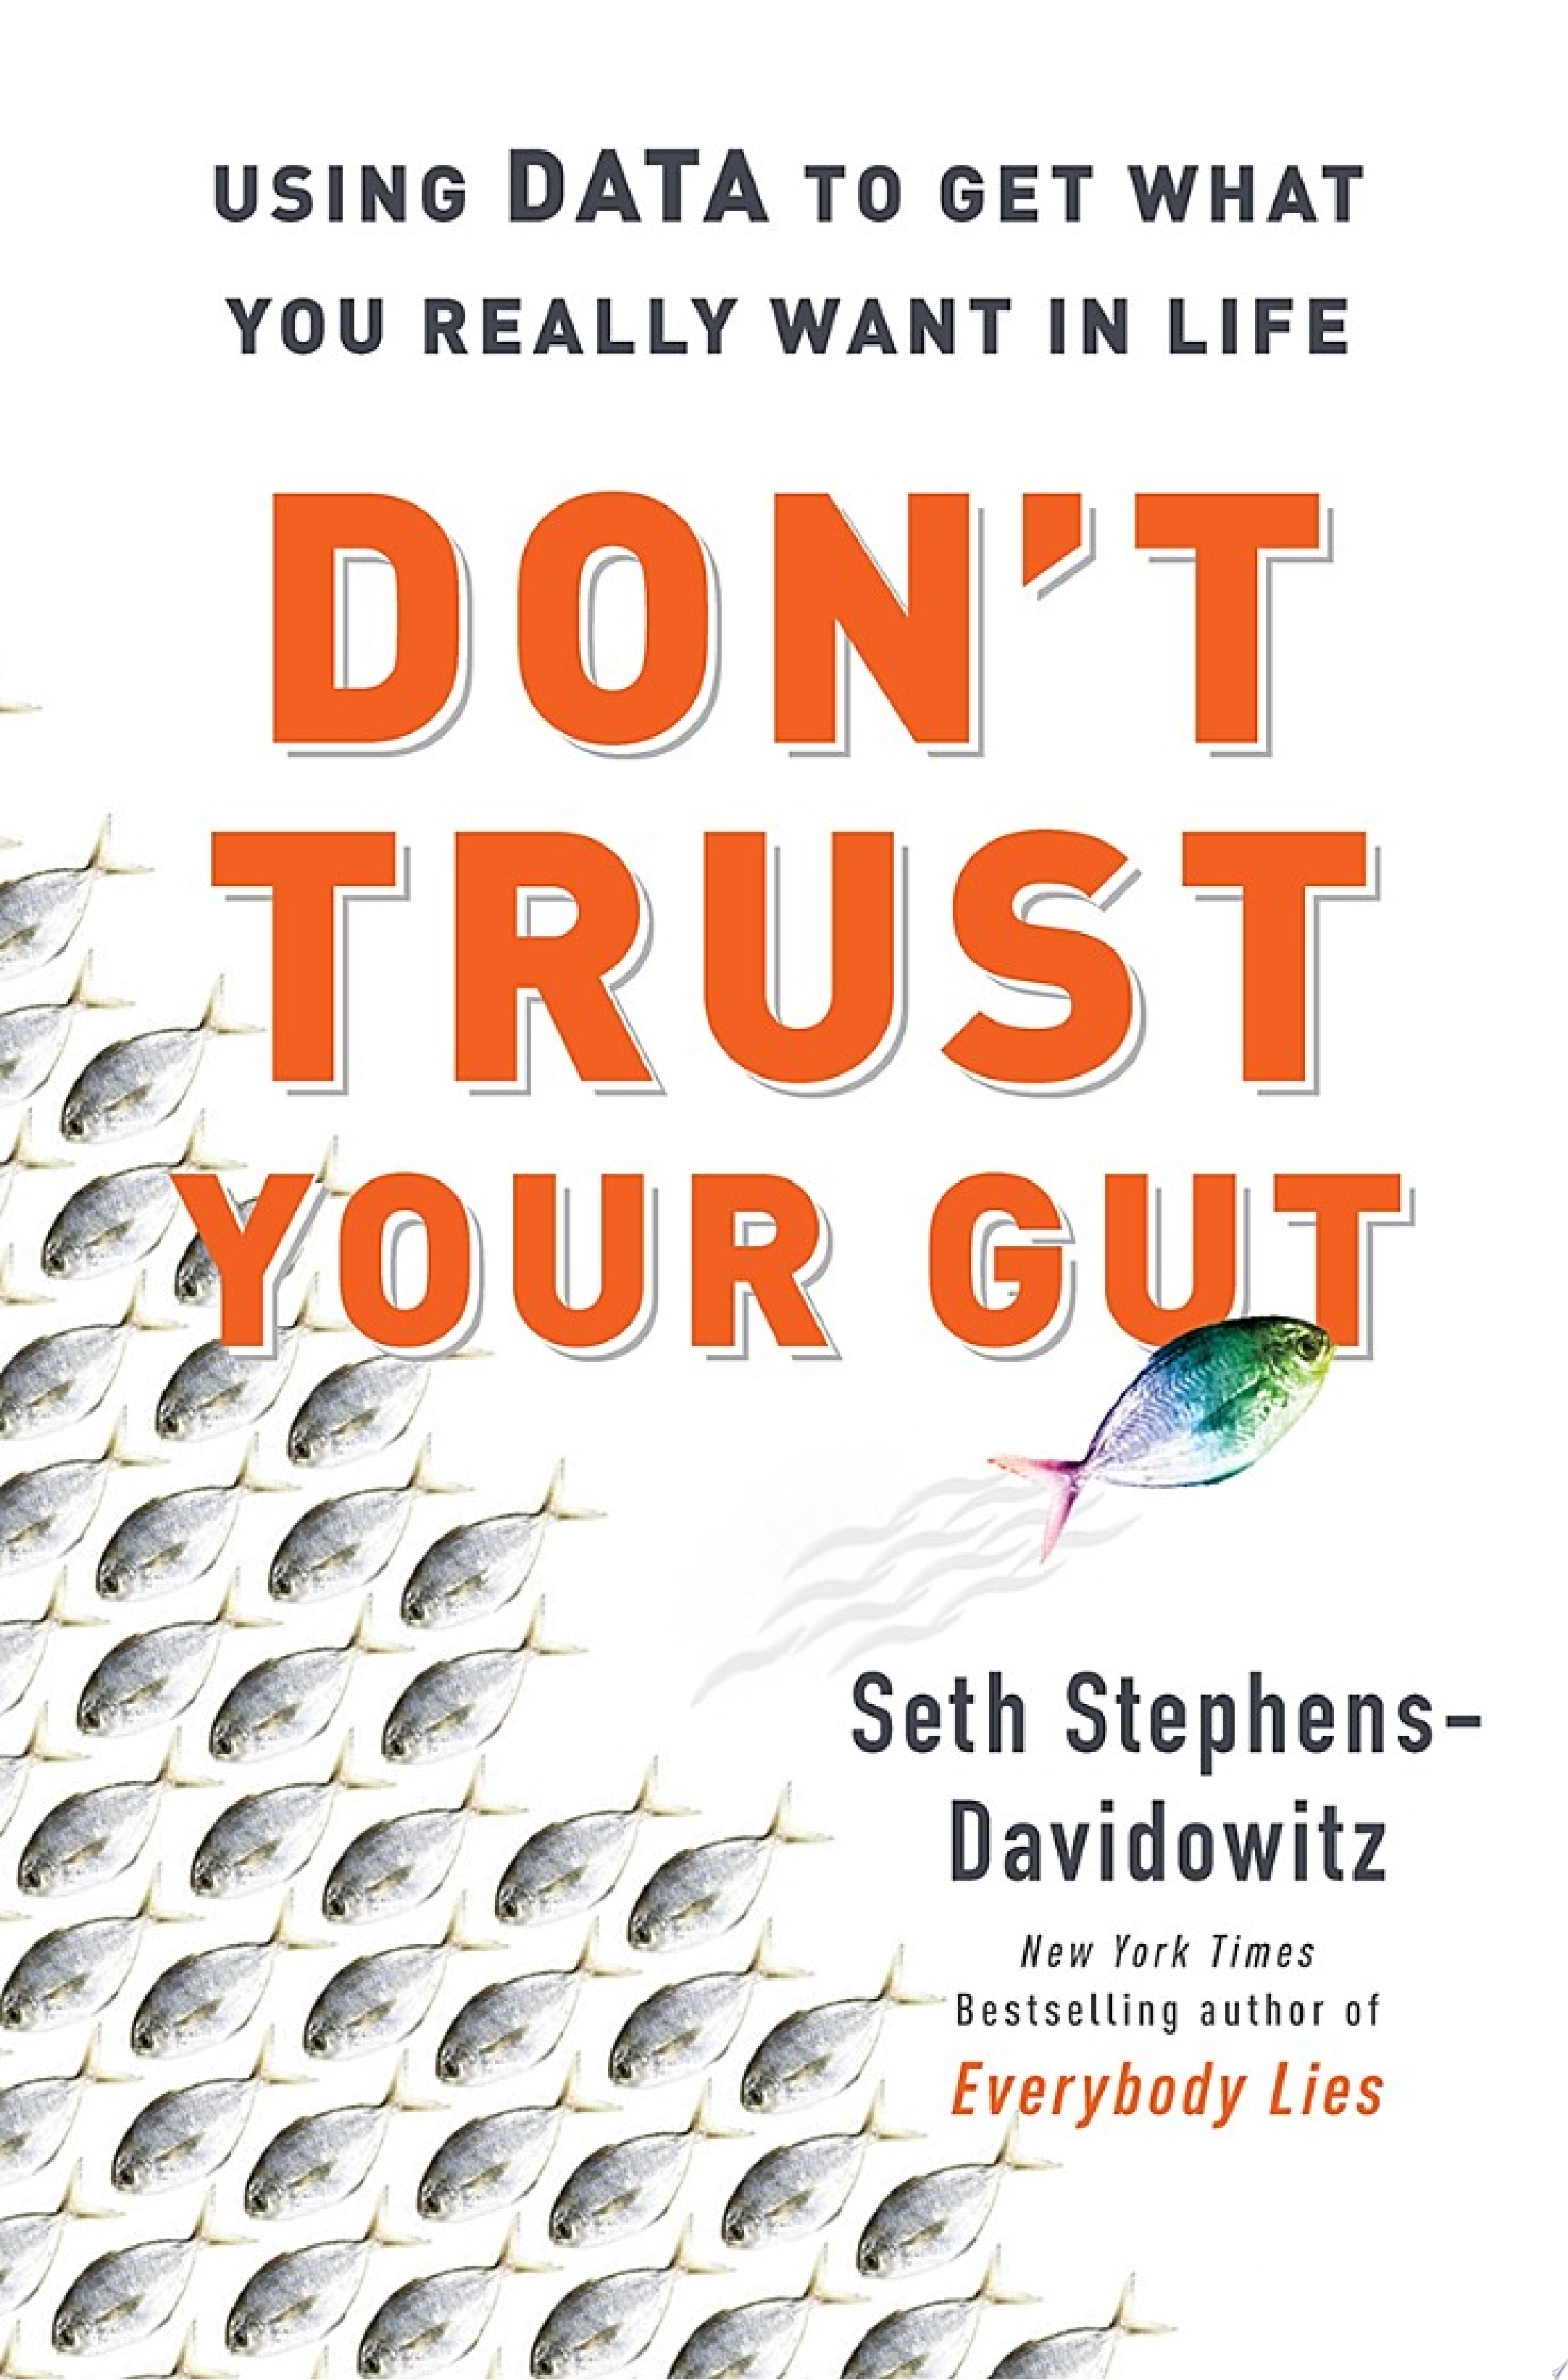 Image for "Don't Trust Your Gut"